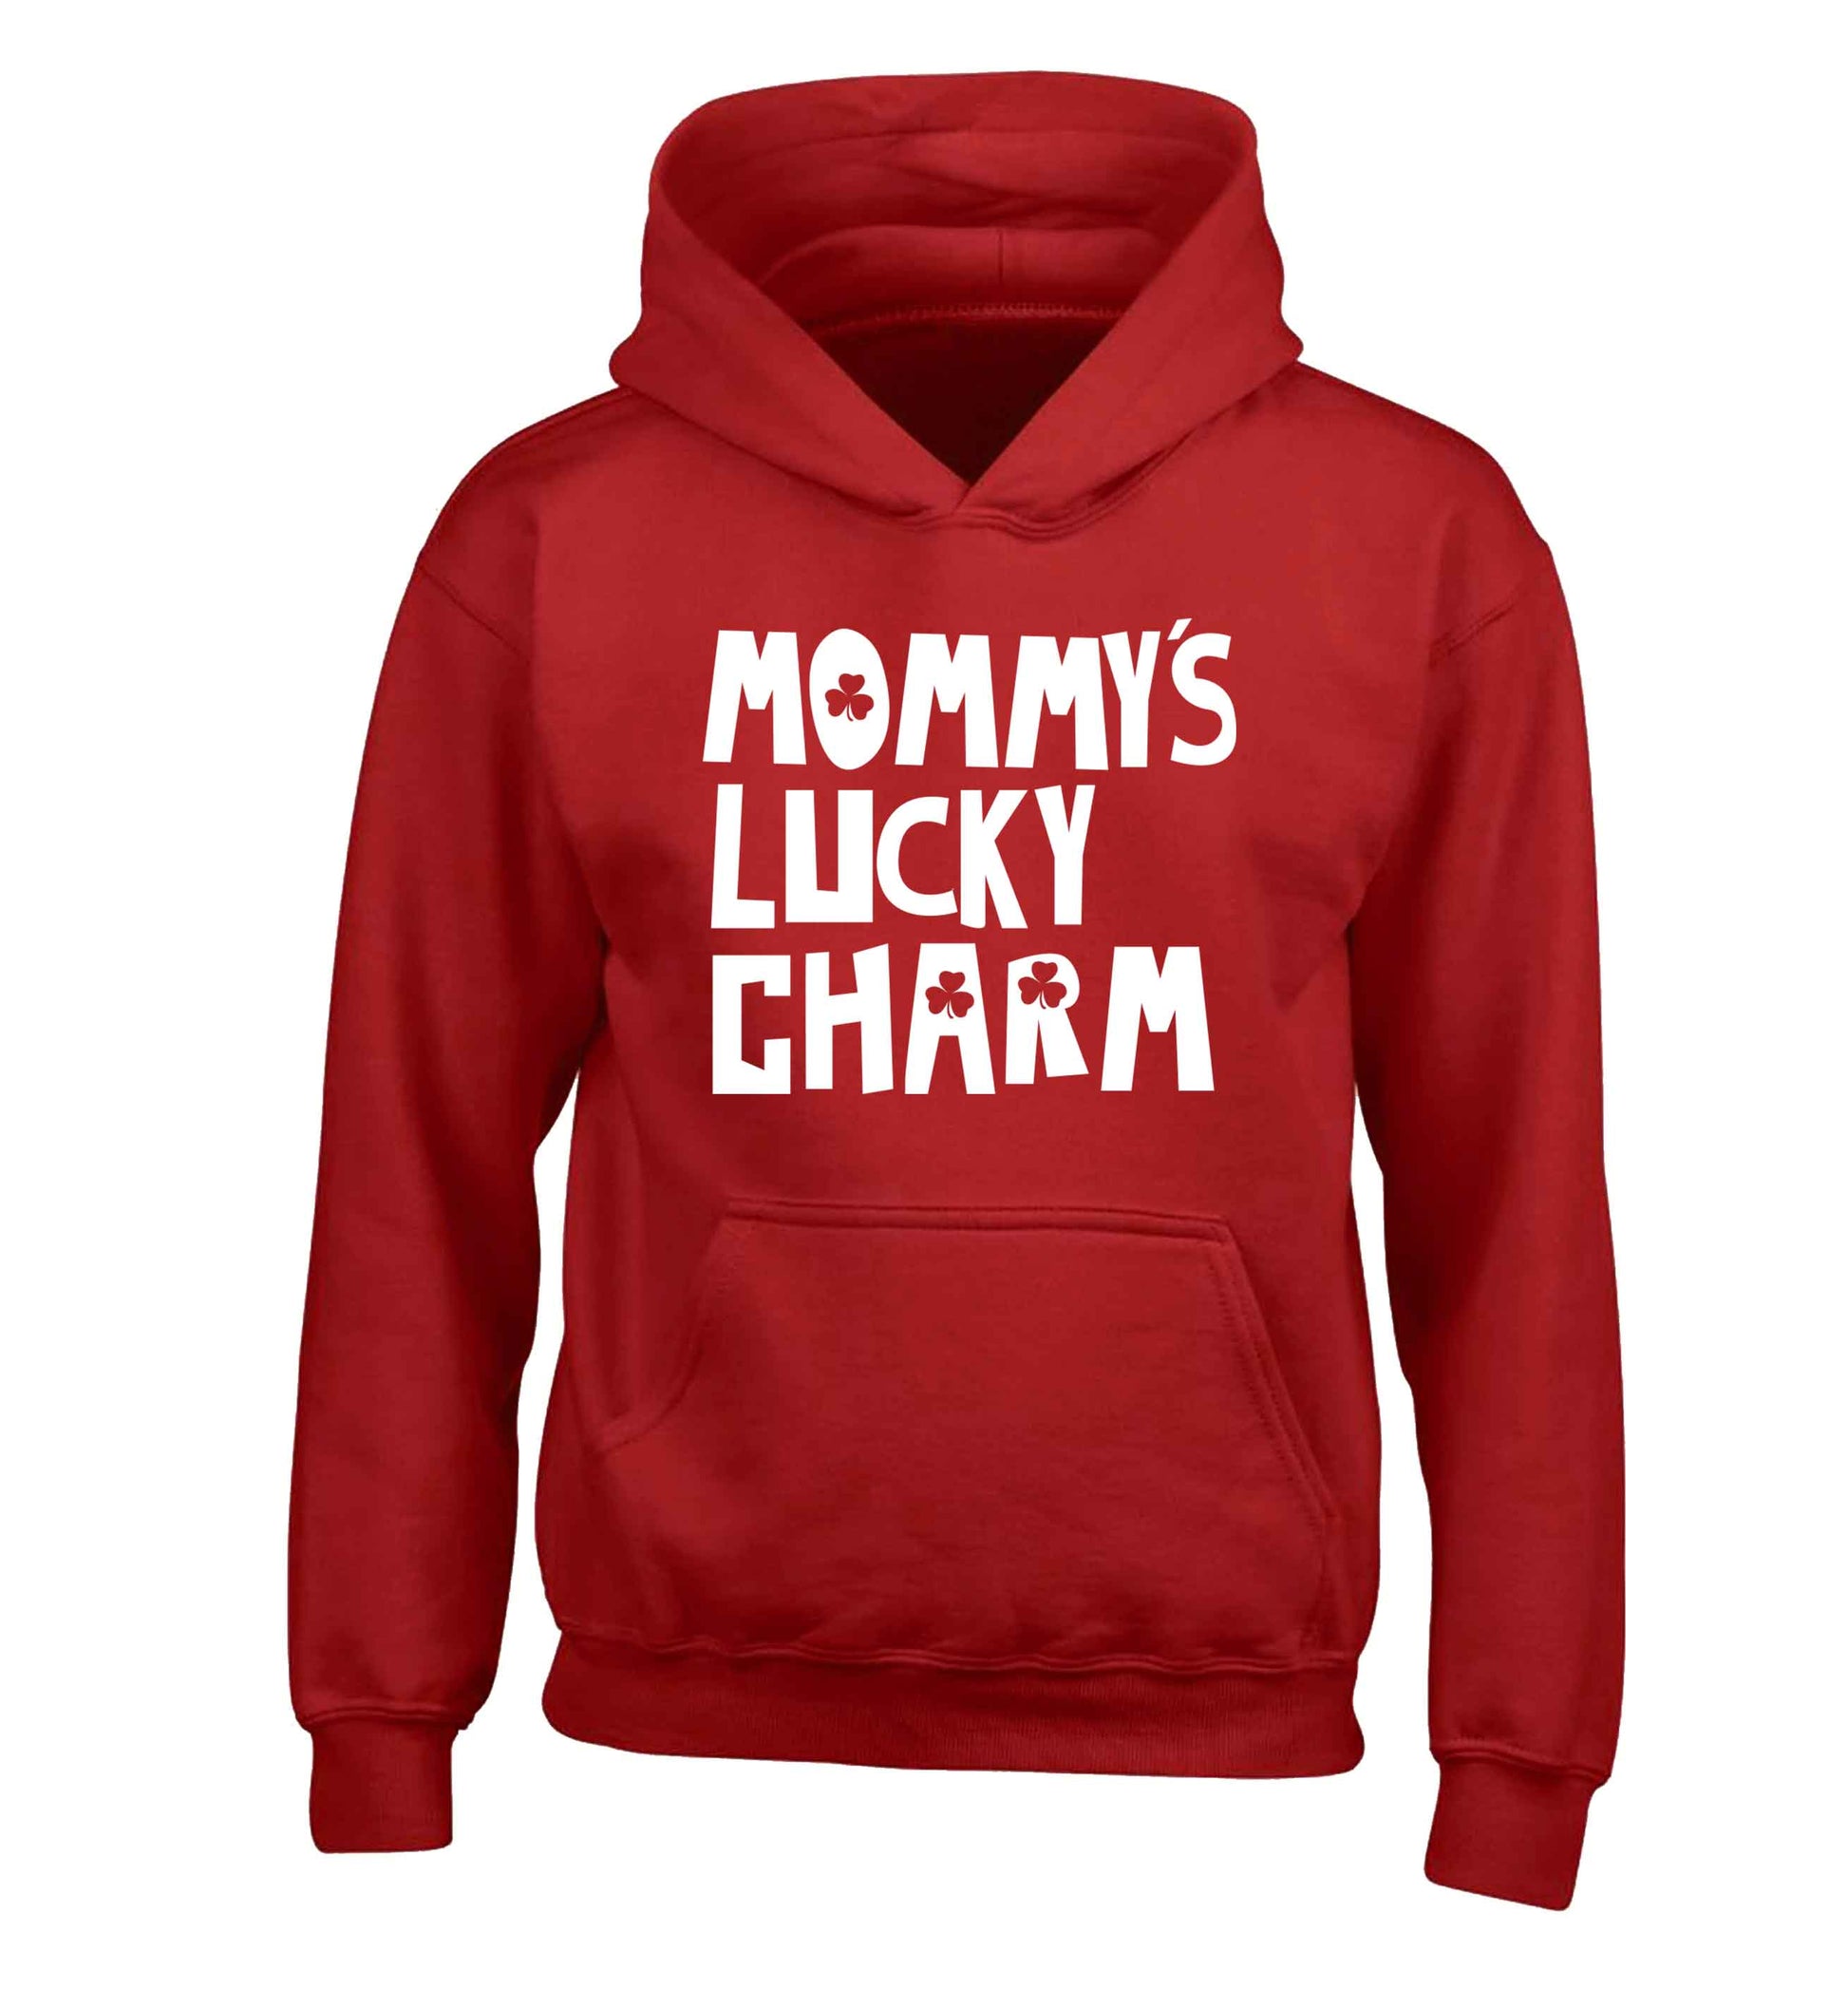 Mommy's lucky charm children's red hoodie 12-13 Years